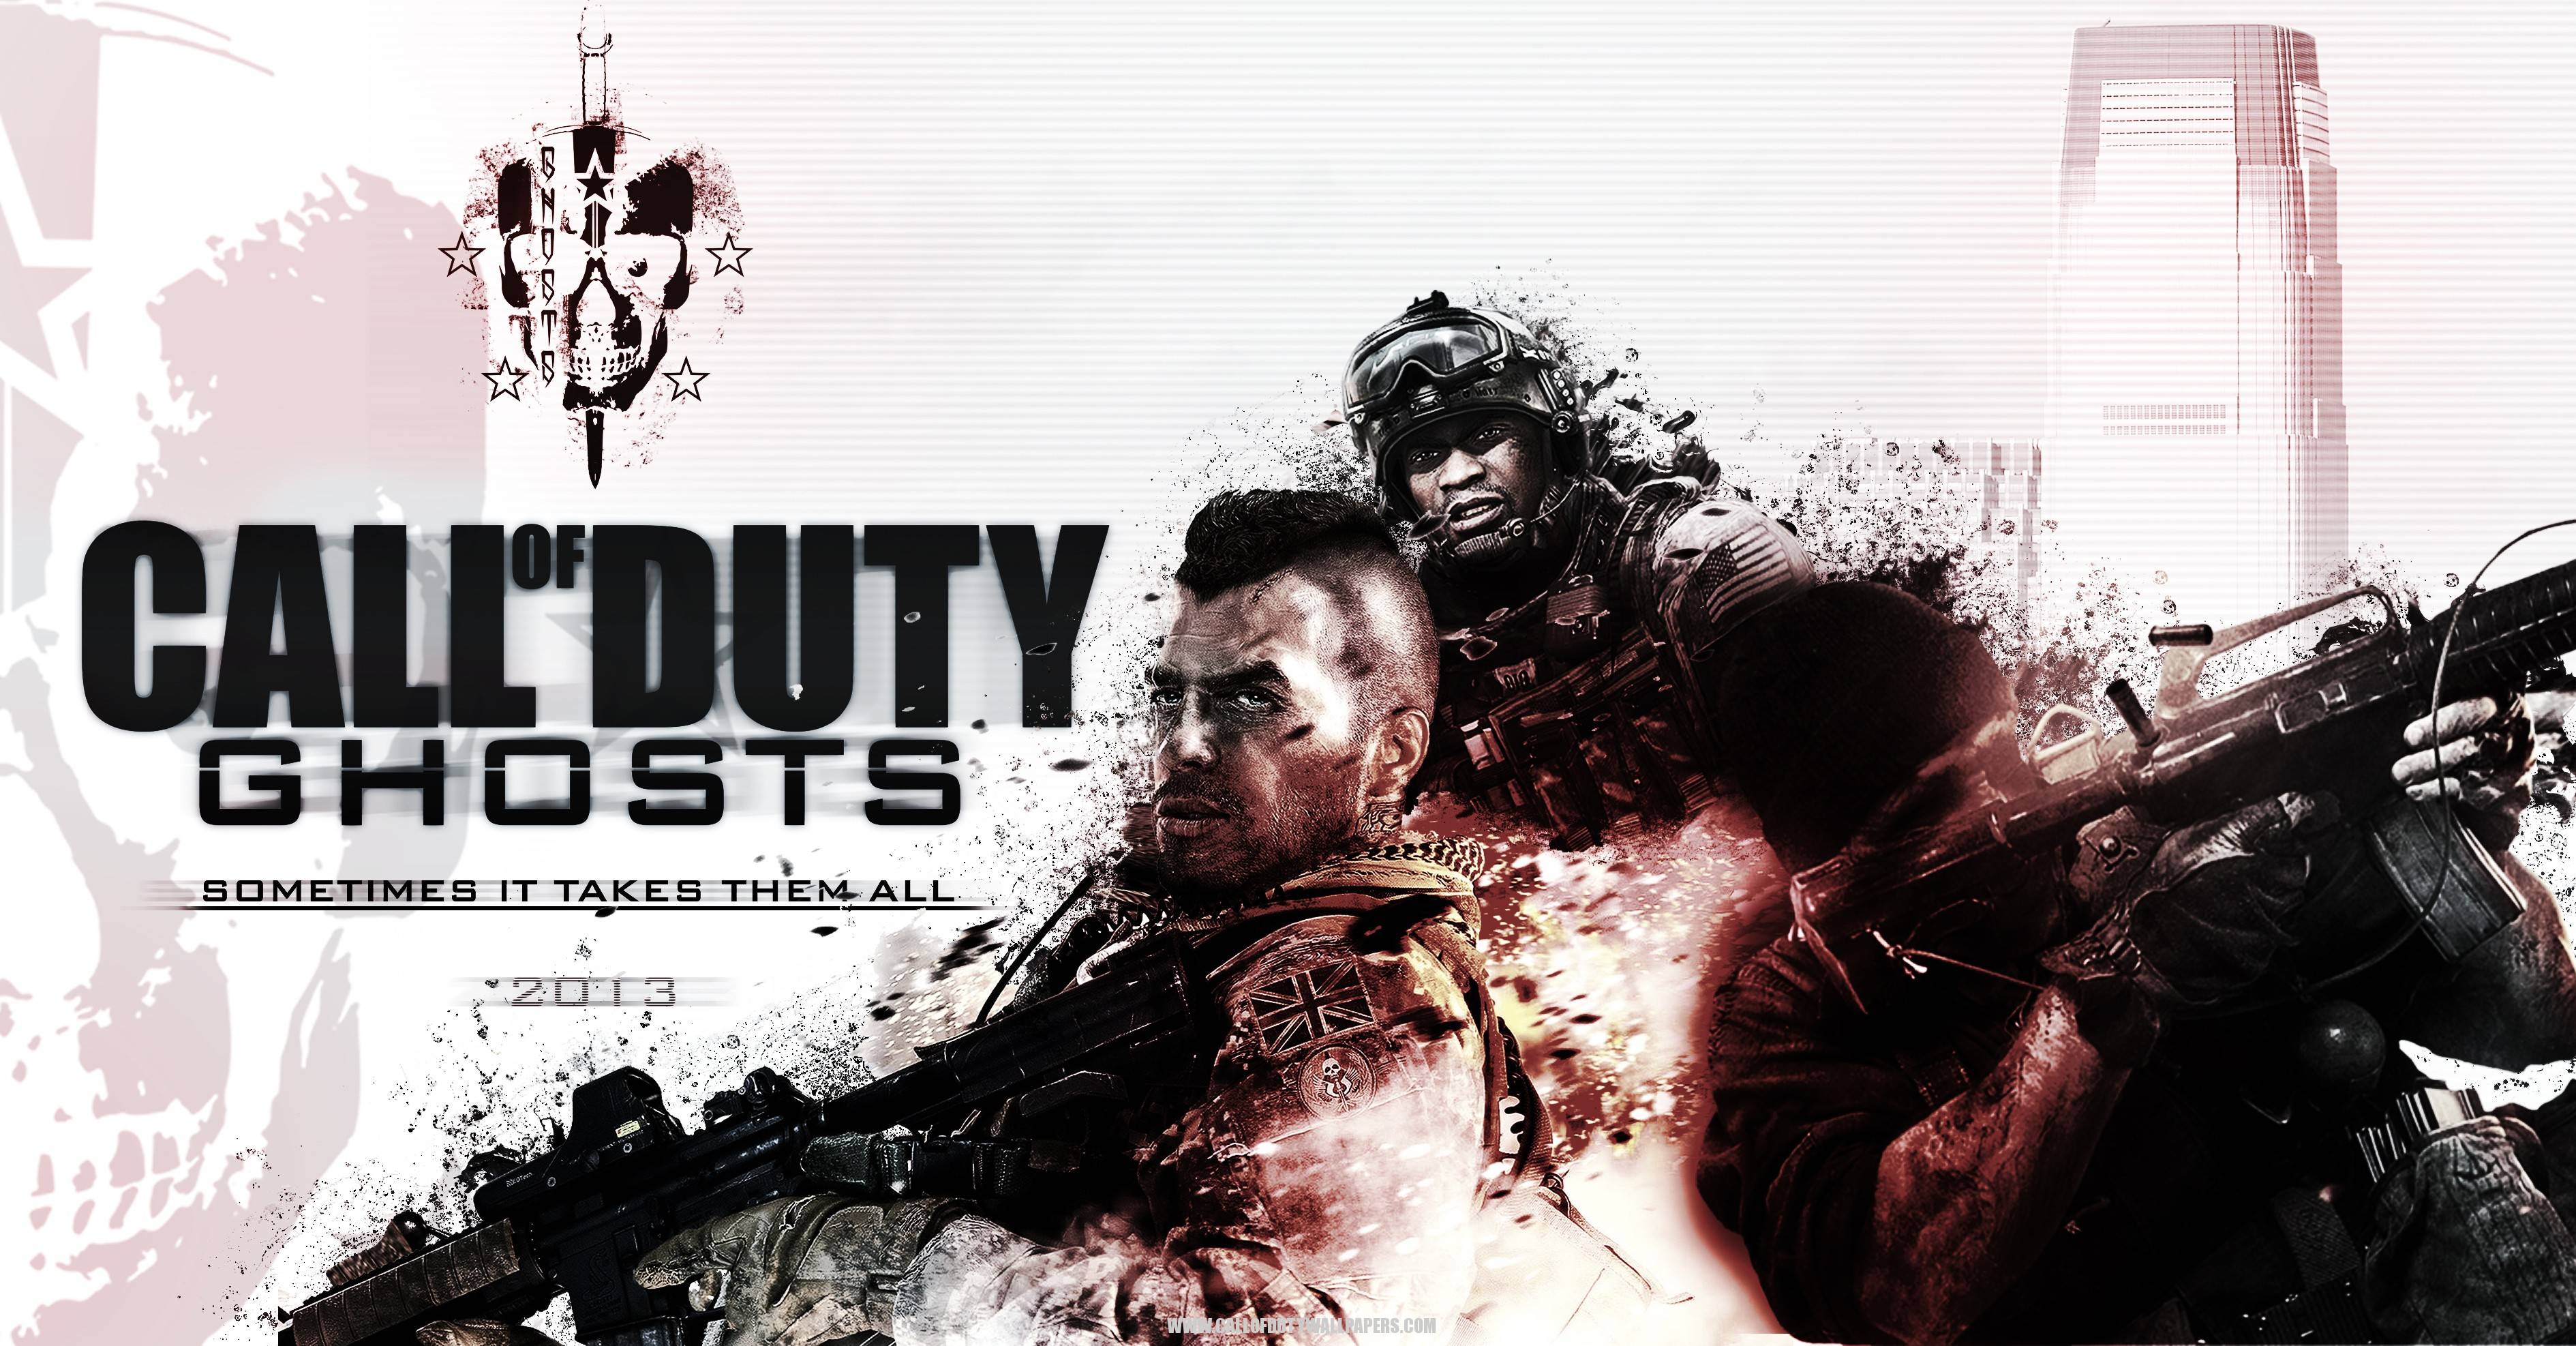 Call of Duty Ghosts 2013 Wallpaper Wide or HD